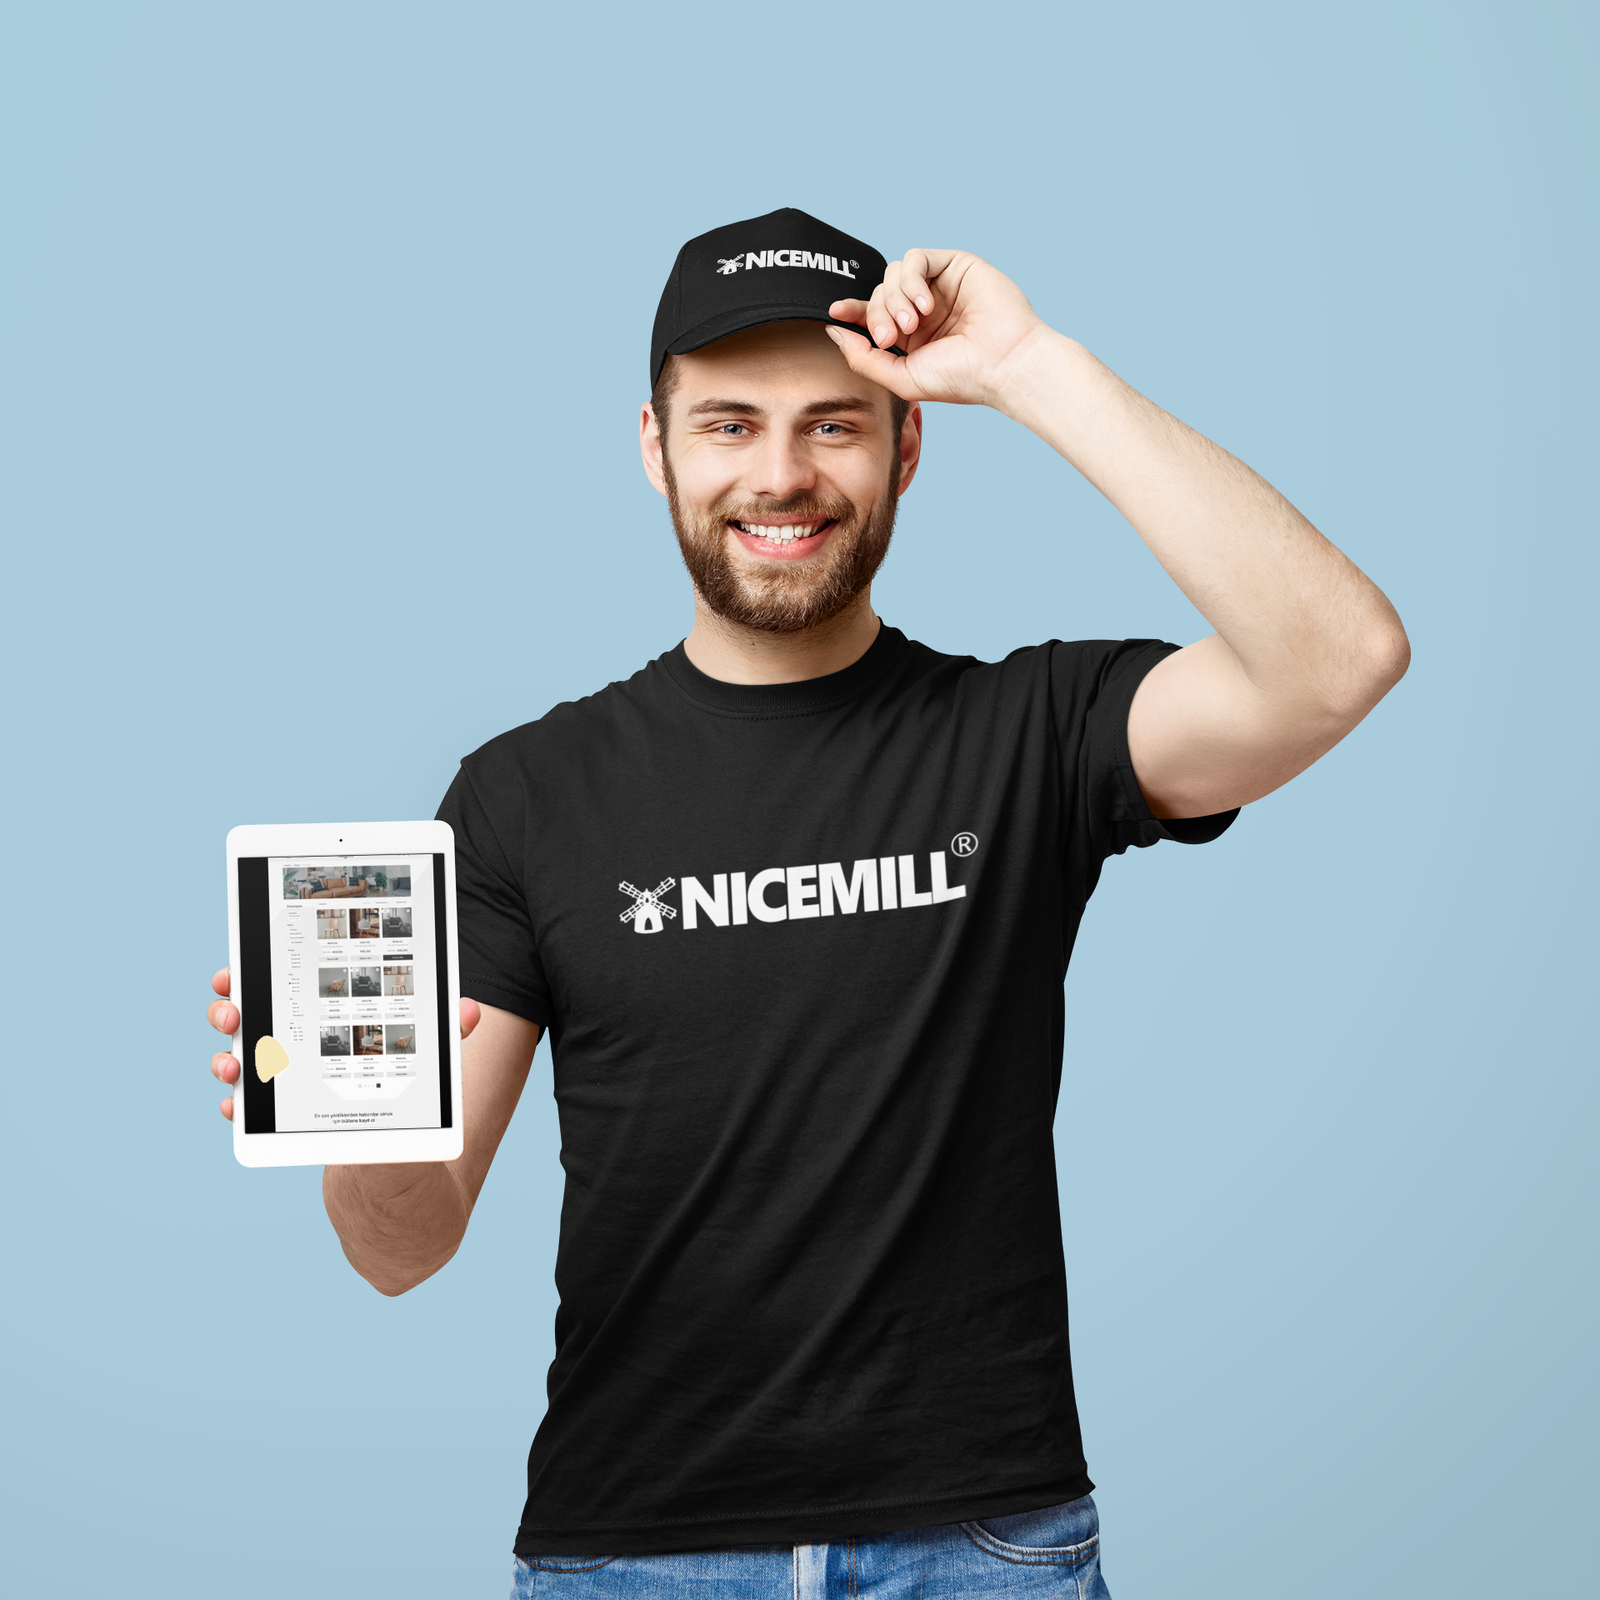 t shirt and dad hat mockup featuring a man holding an ipad mini 42674 r el2